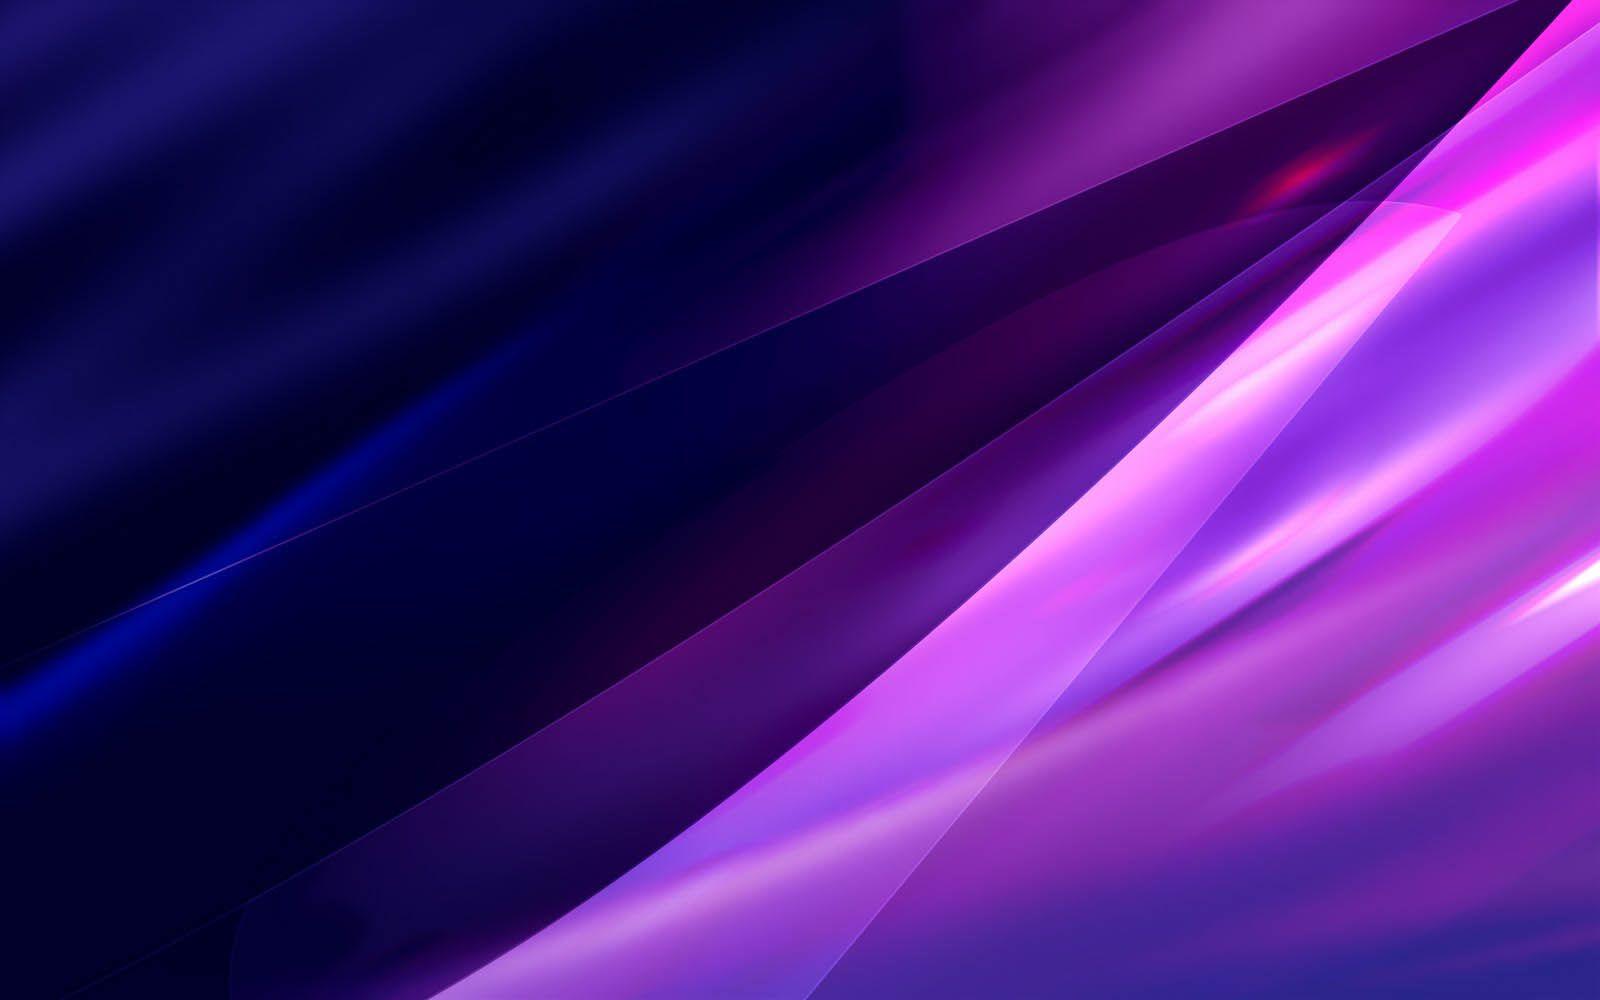 Blue and Purple Abstract Wallpapers - Top Free Blue and Purple Abstract Backgrounds